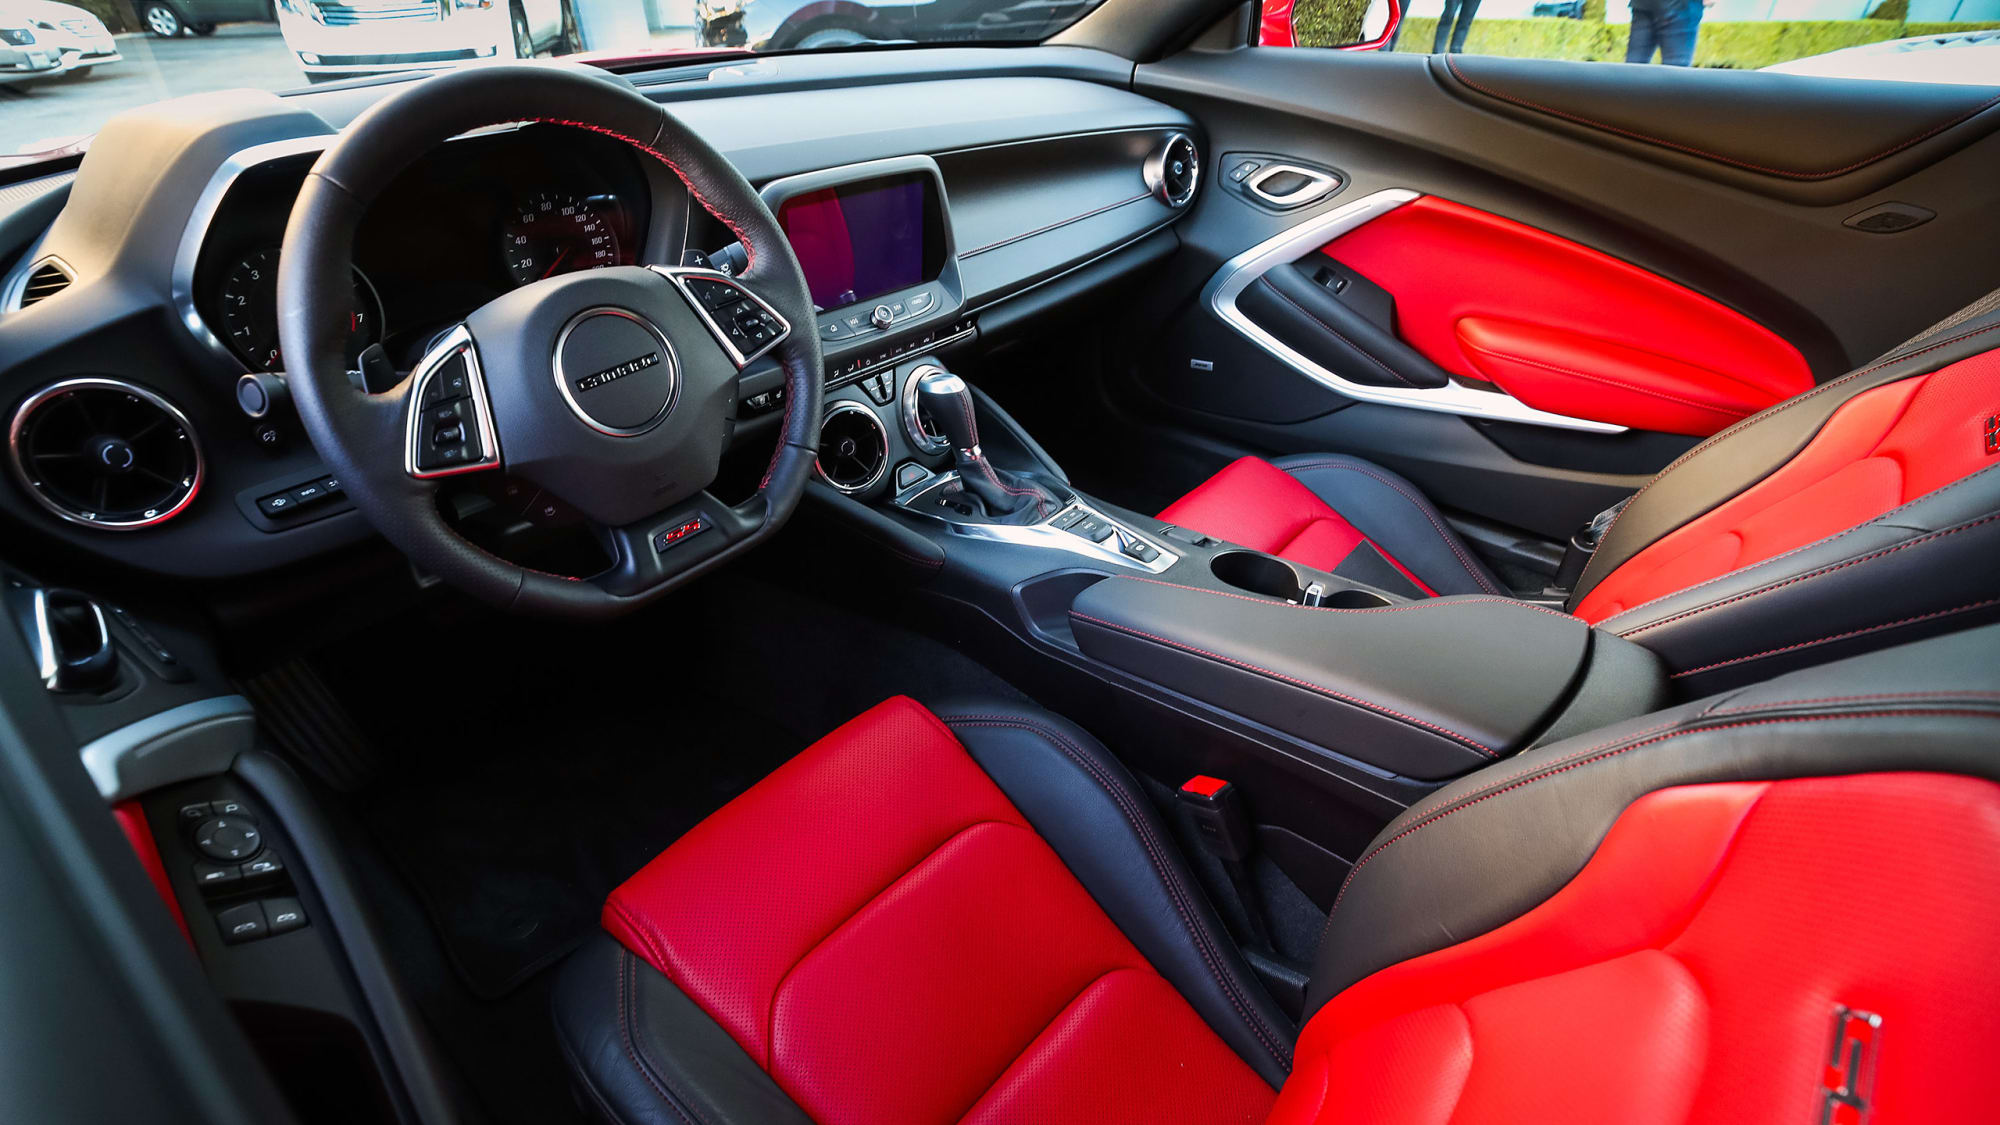 2019 Chevrolet Camaro Review Price Specs Features And